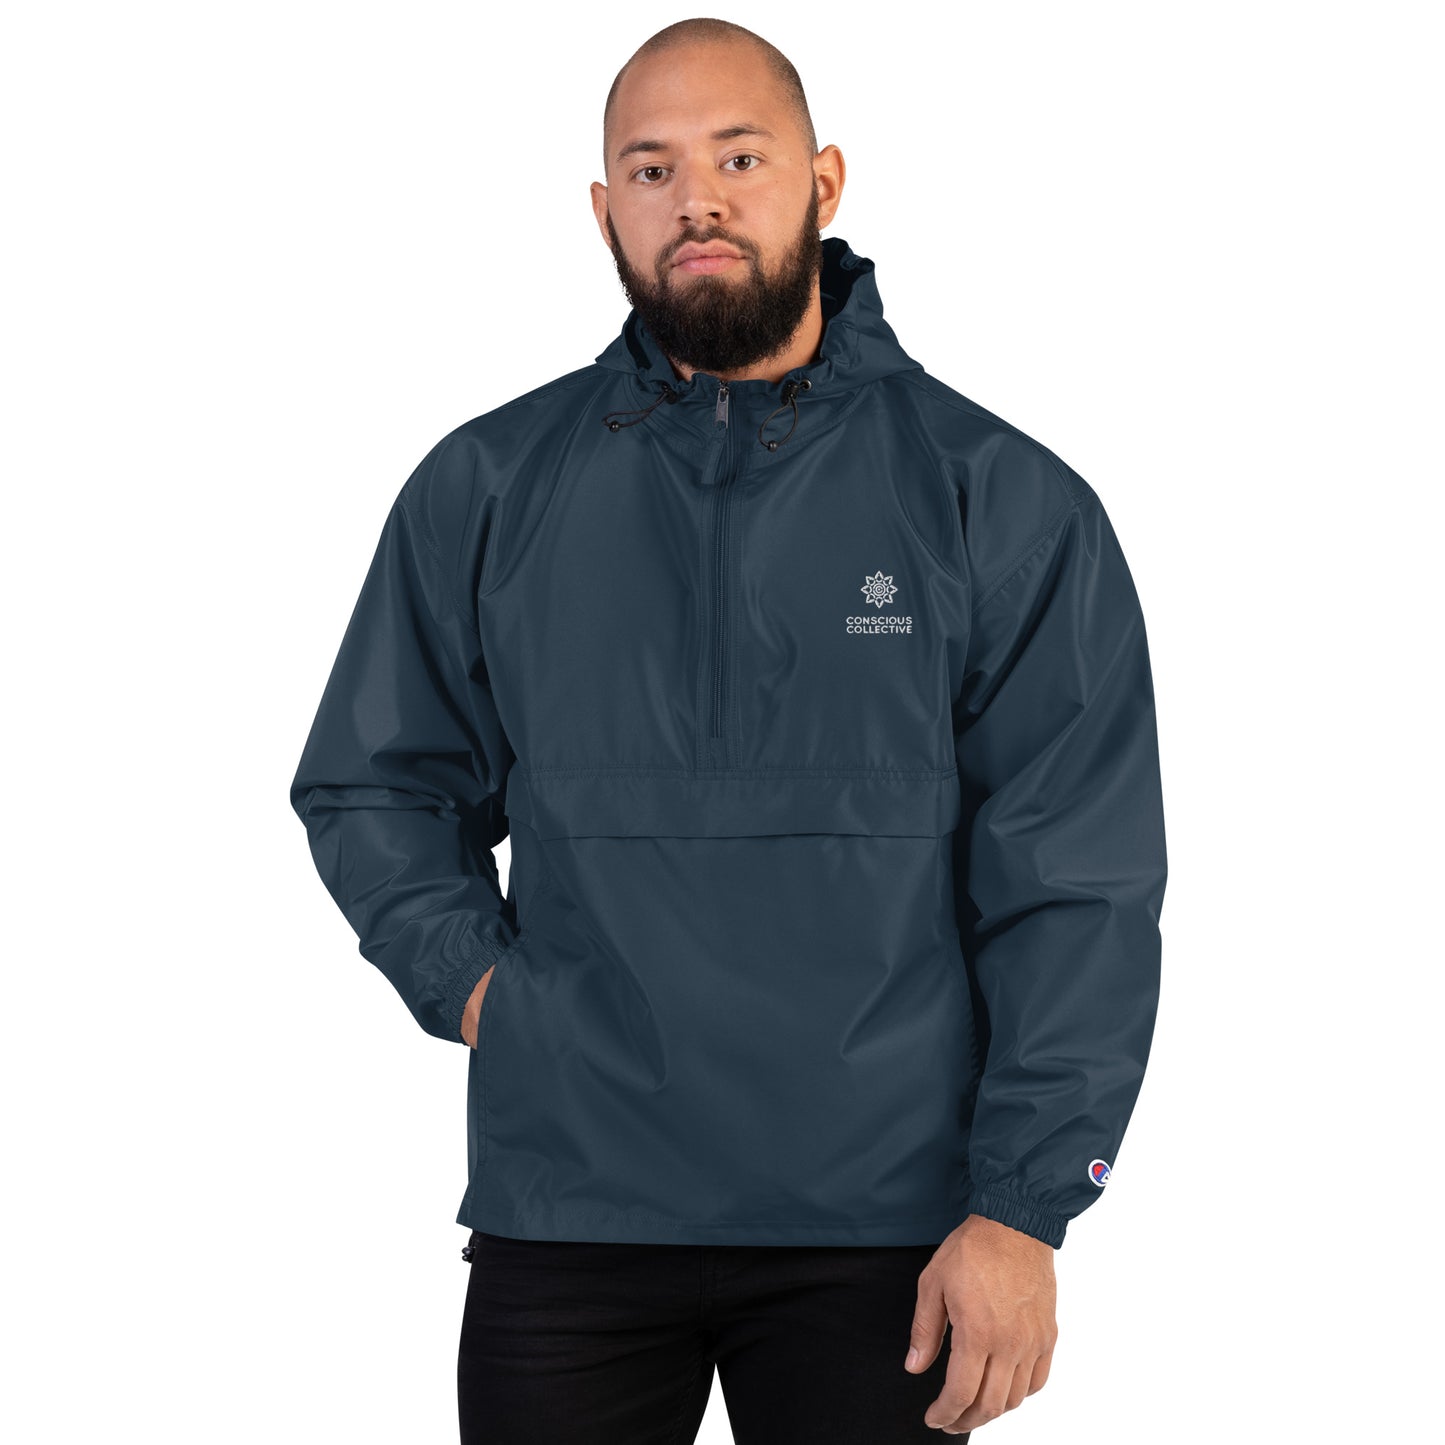 CC Logo (Embroidered) - Unisex Packable Jacket